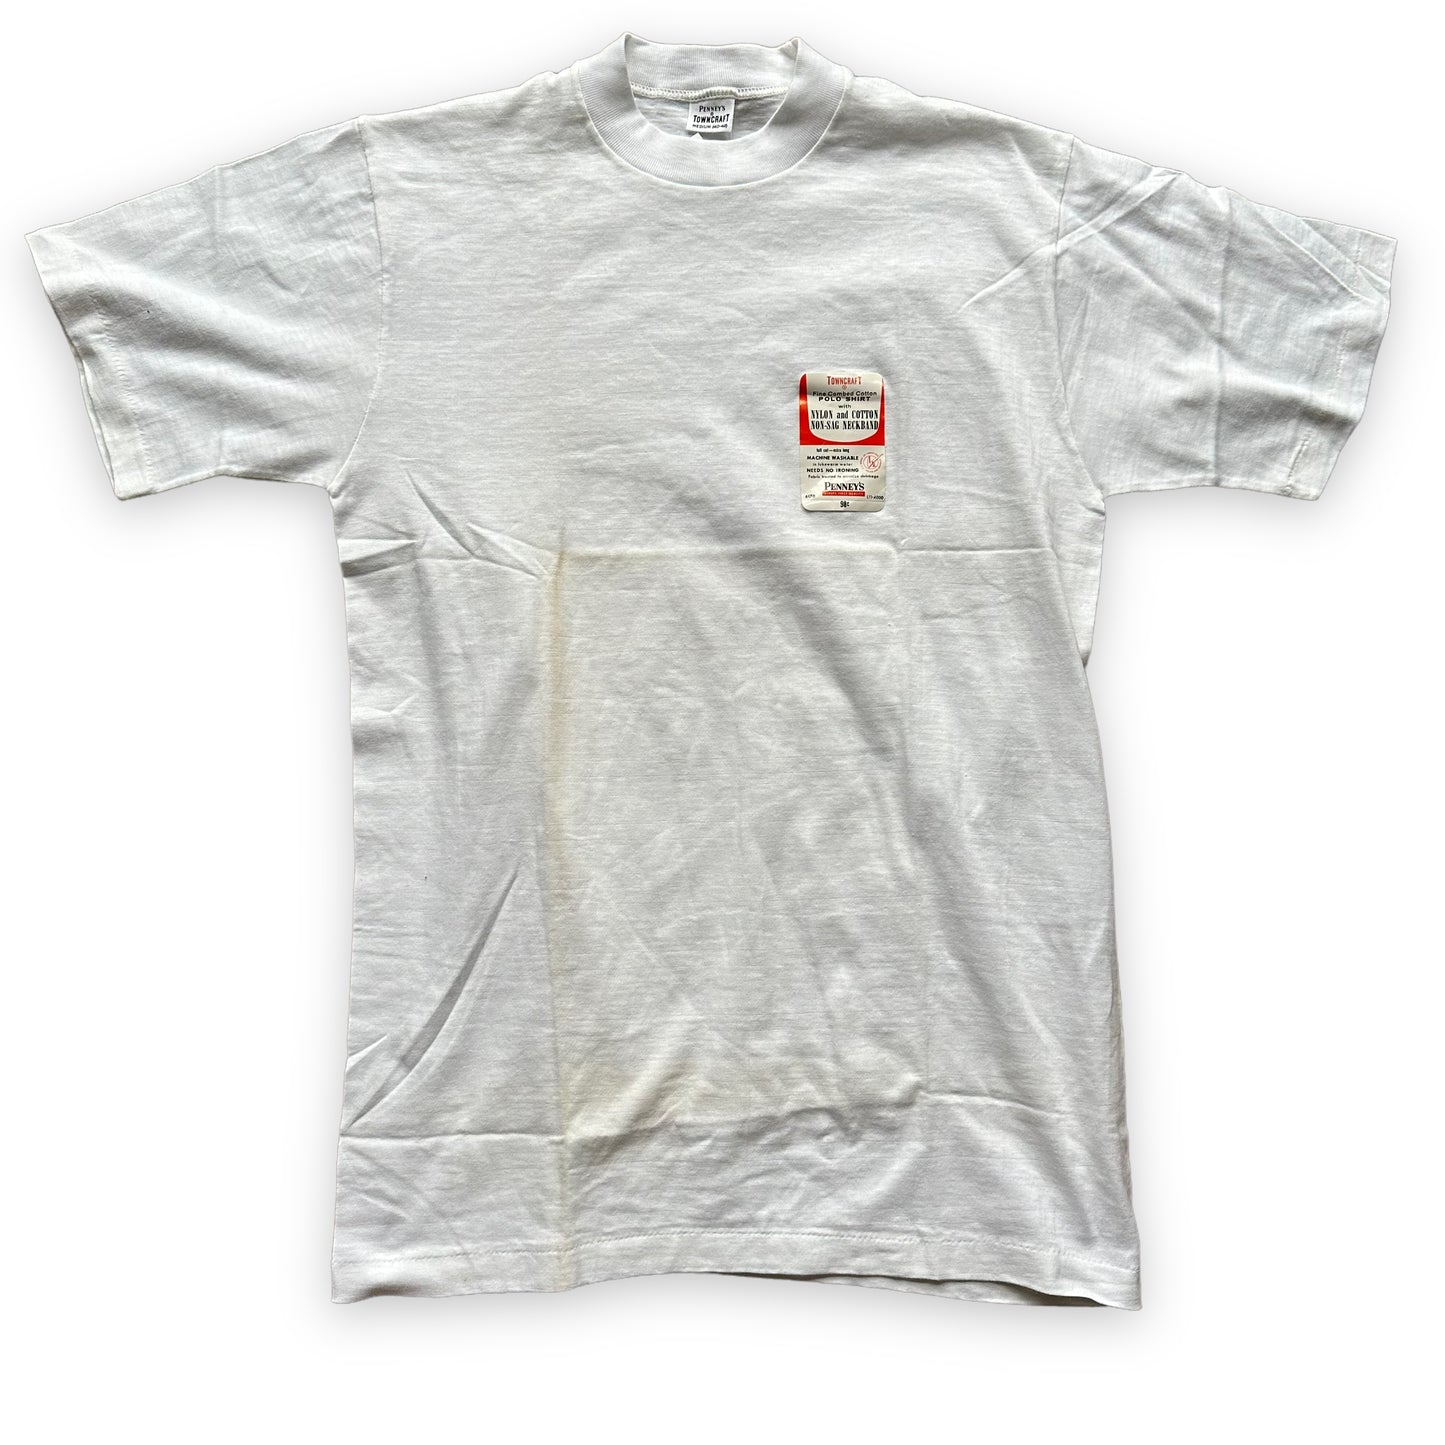 Front View of Vintage NWT Penneys Towncraft Tee Shirt SZ M | Vintage Blank Tees Seattle | Vintage T-Shirts Seattle